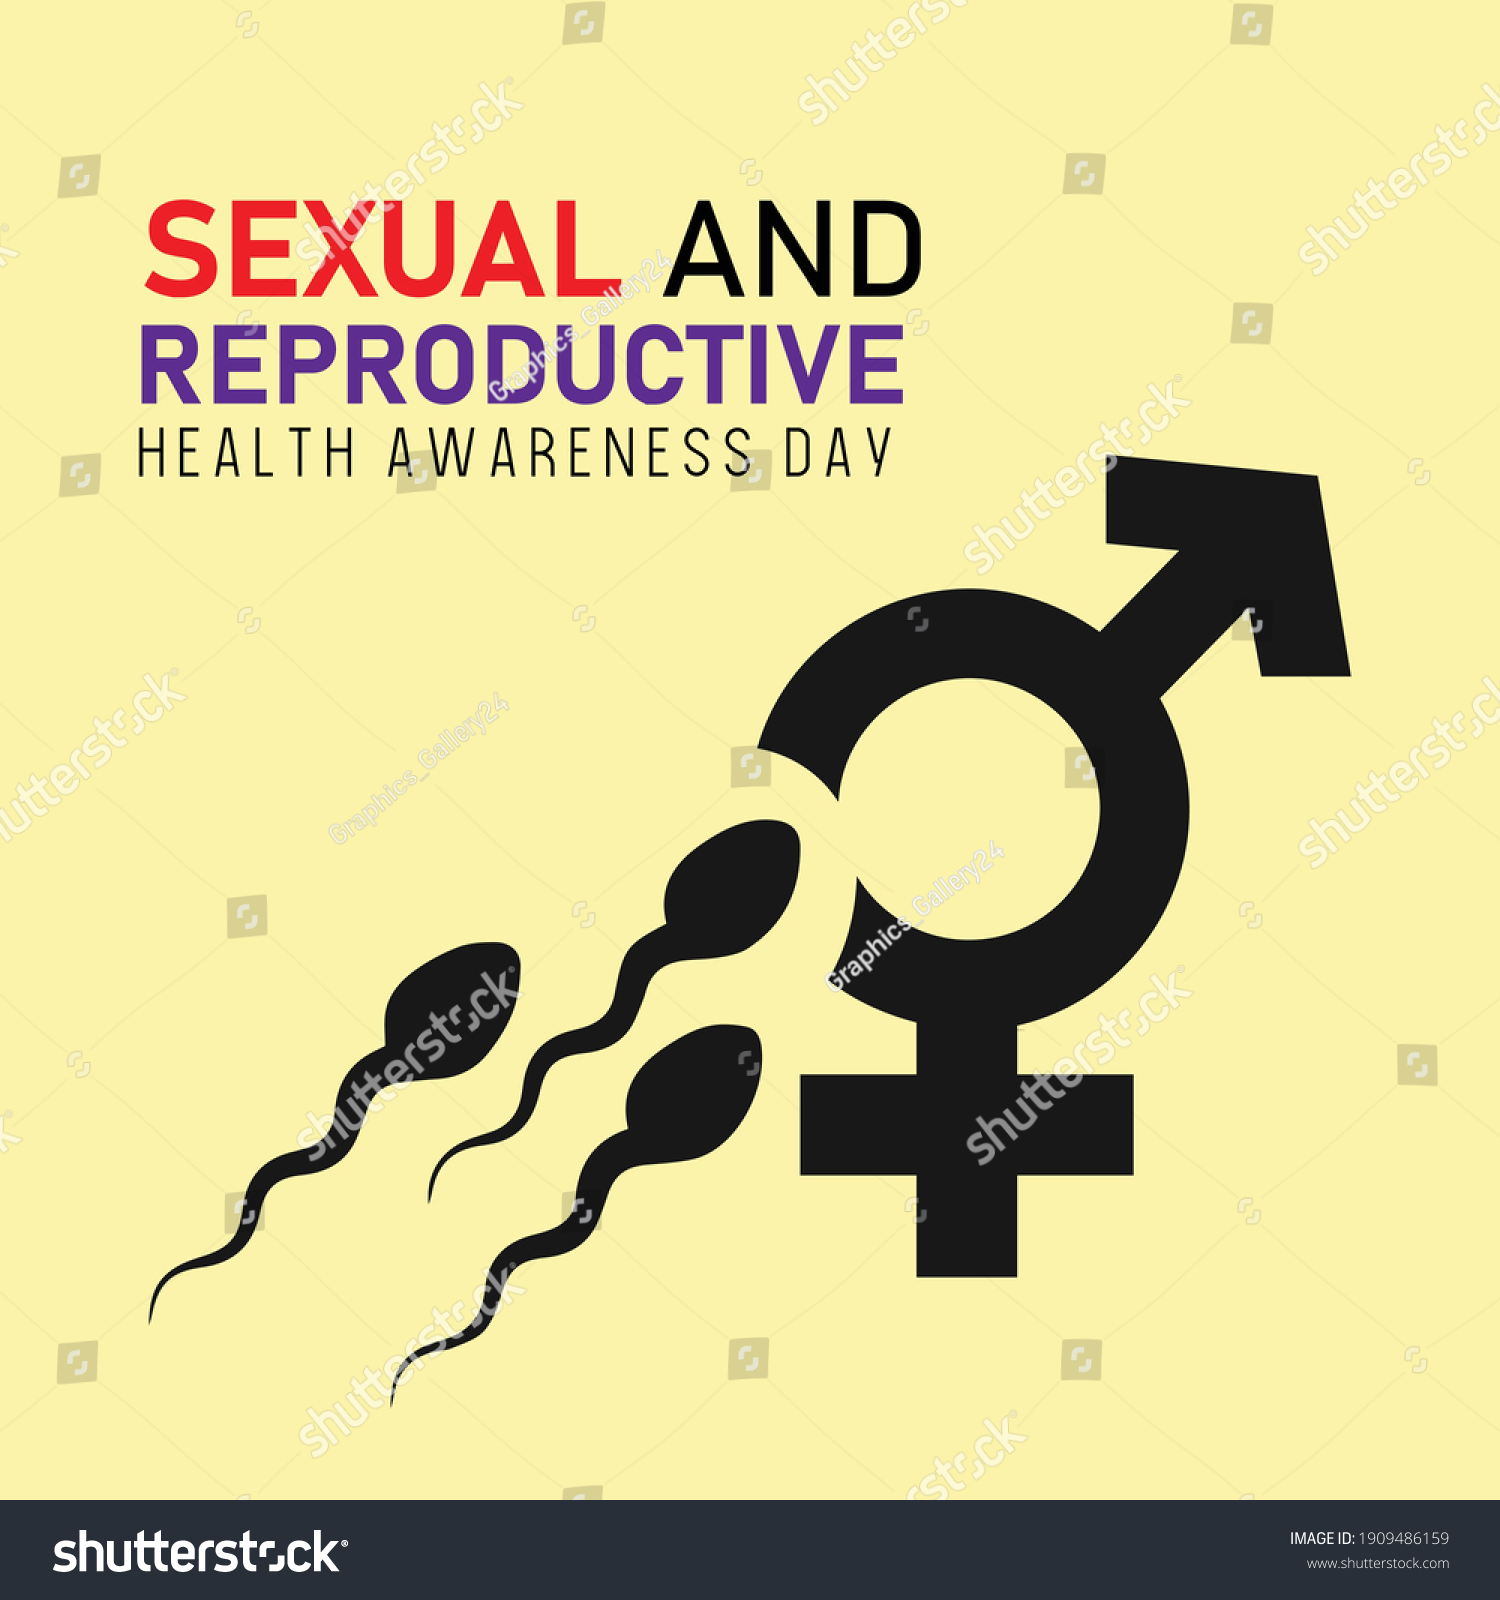 Sexual Reproductive Health Awareness Day Stock Vector Royalty Free 1909486159 Shutterstock 